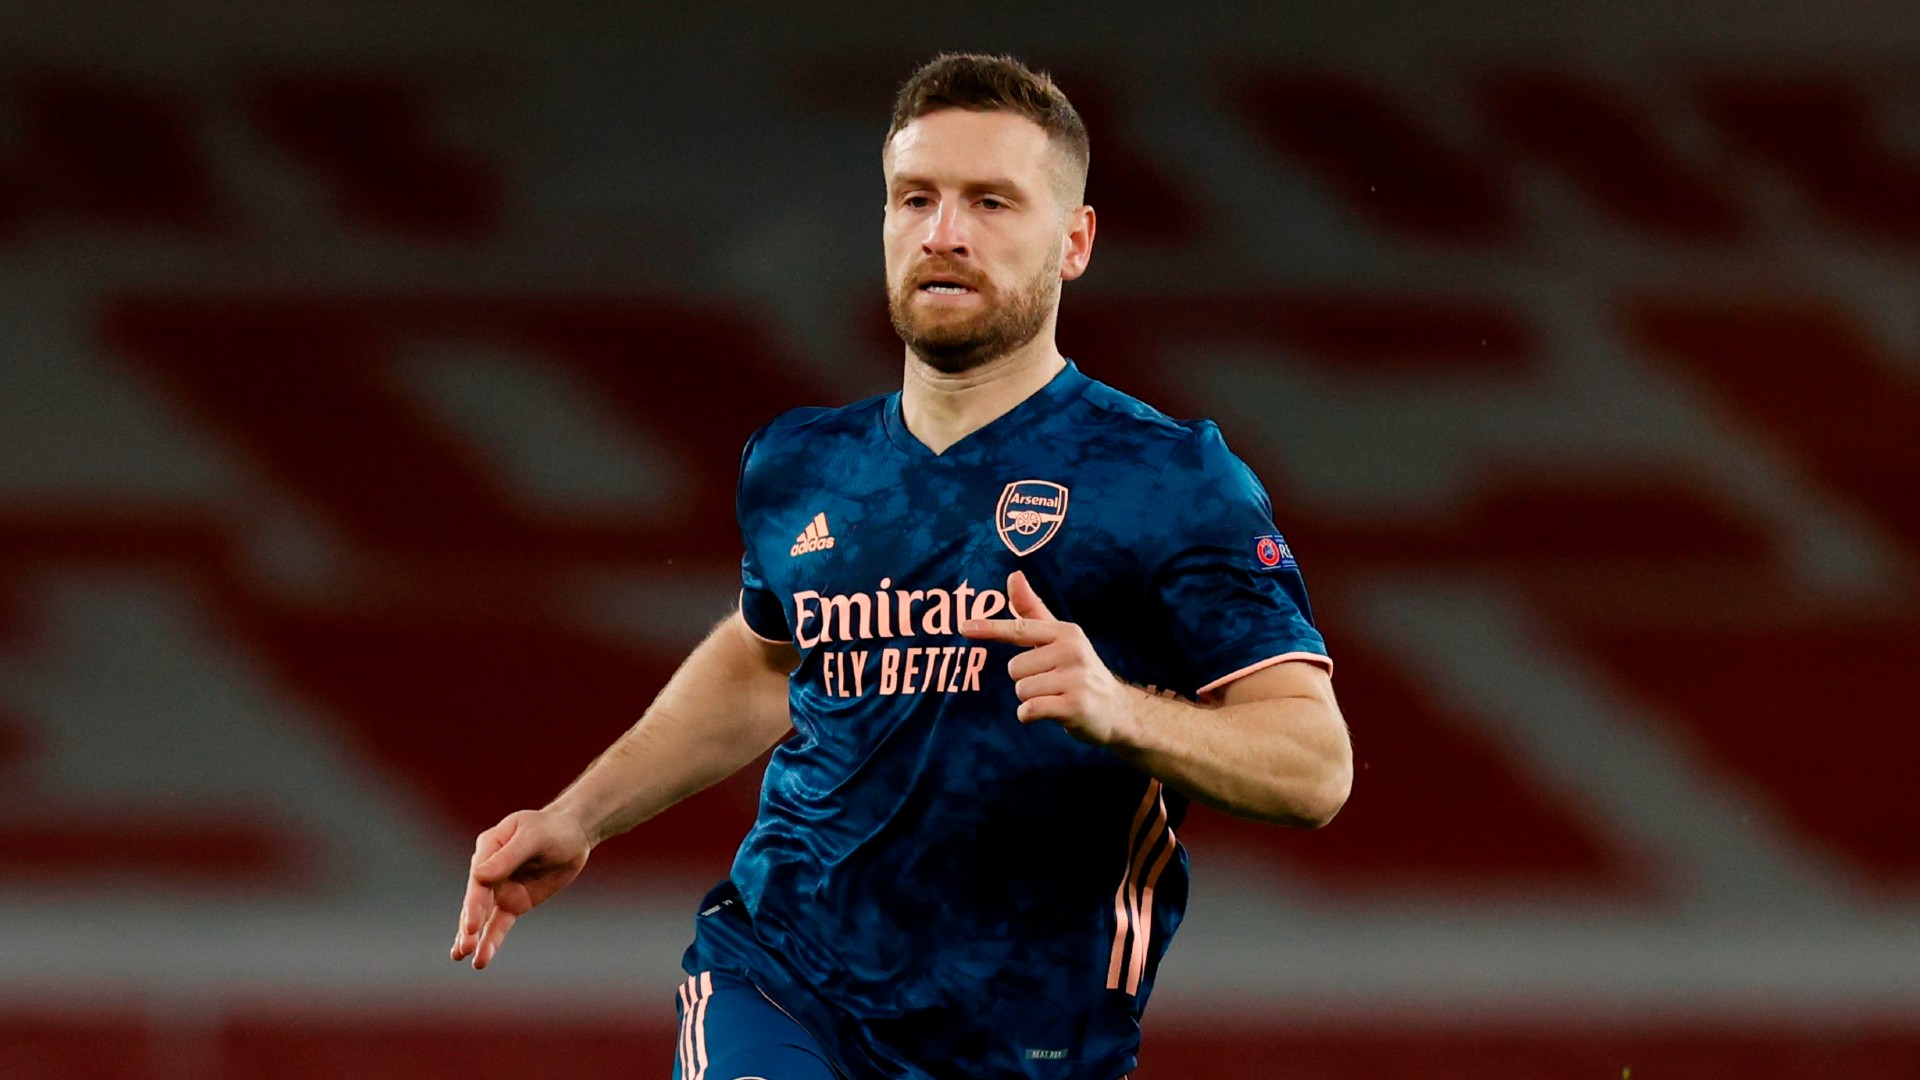 ‘Wouldn’t take Mustafi because I’ve seen him play for Arsenal!’ – Liverpool warned off German defender by Groves